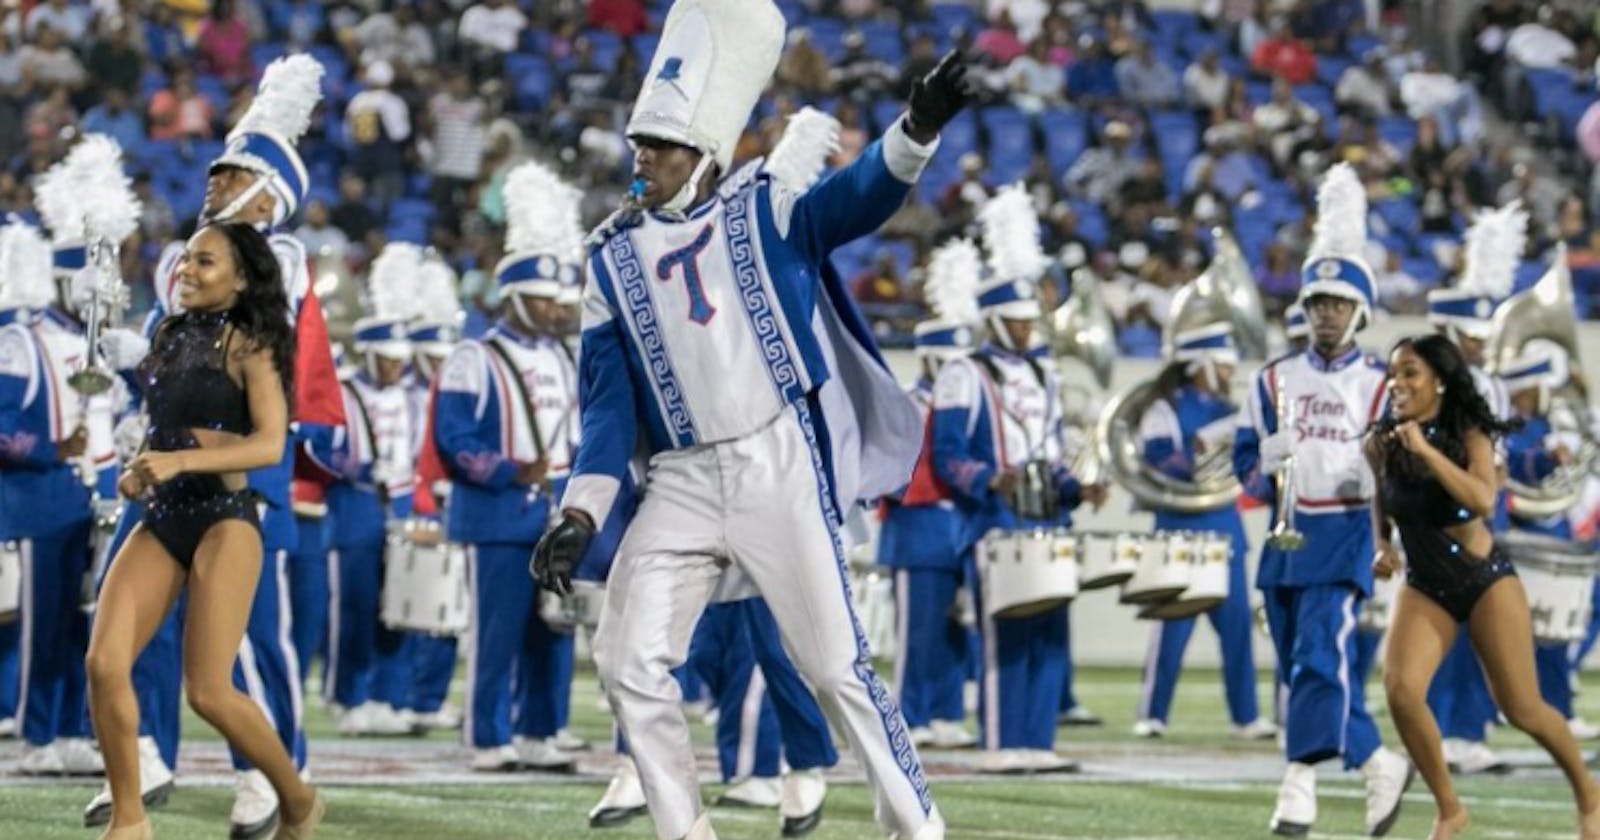 TSU's Marching Band drew attention at the 65th Grammy Awards